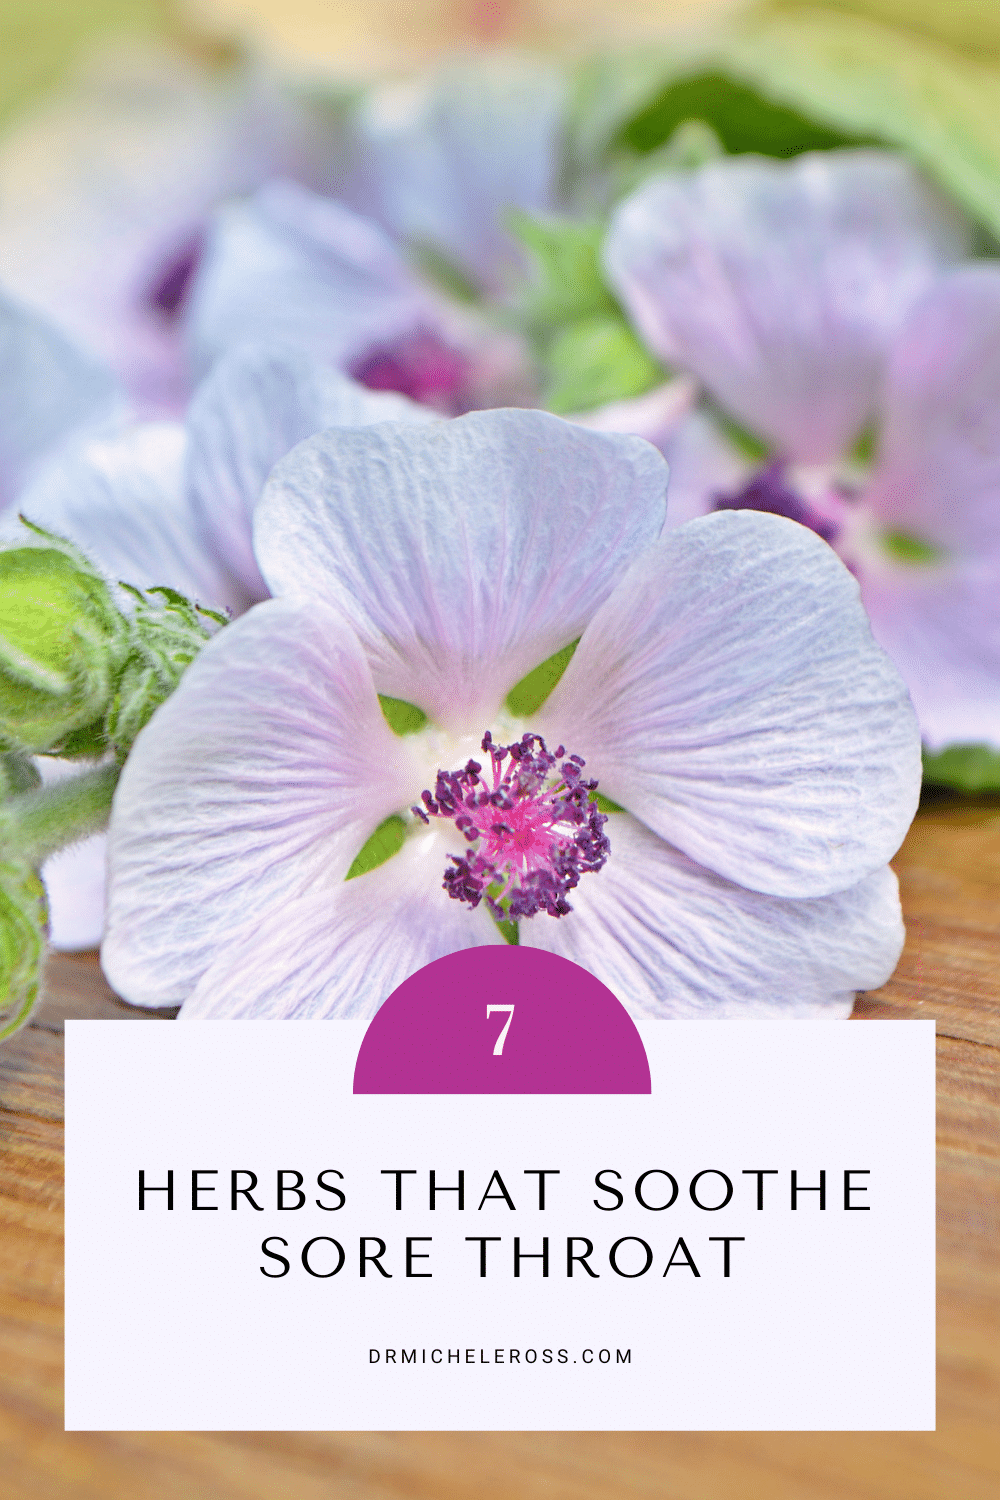 marshmallow herb helps relieve sore throat